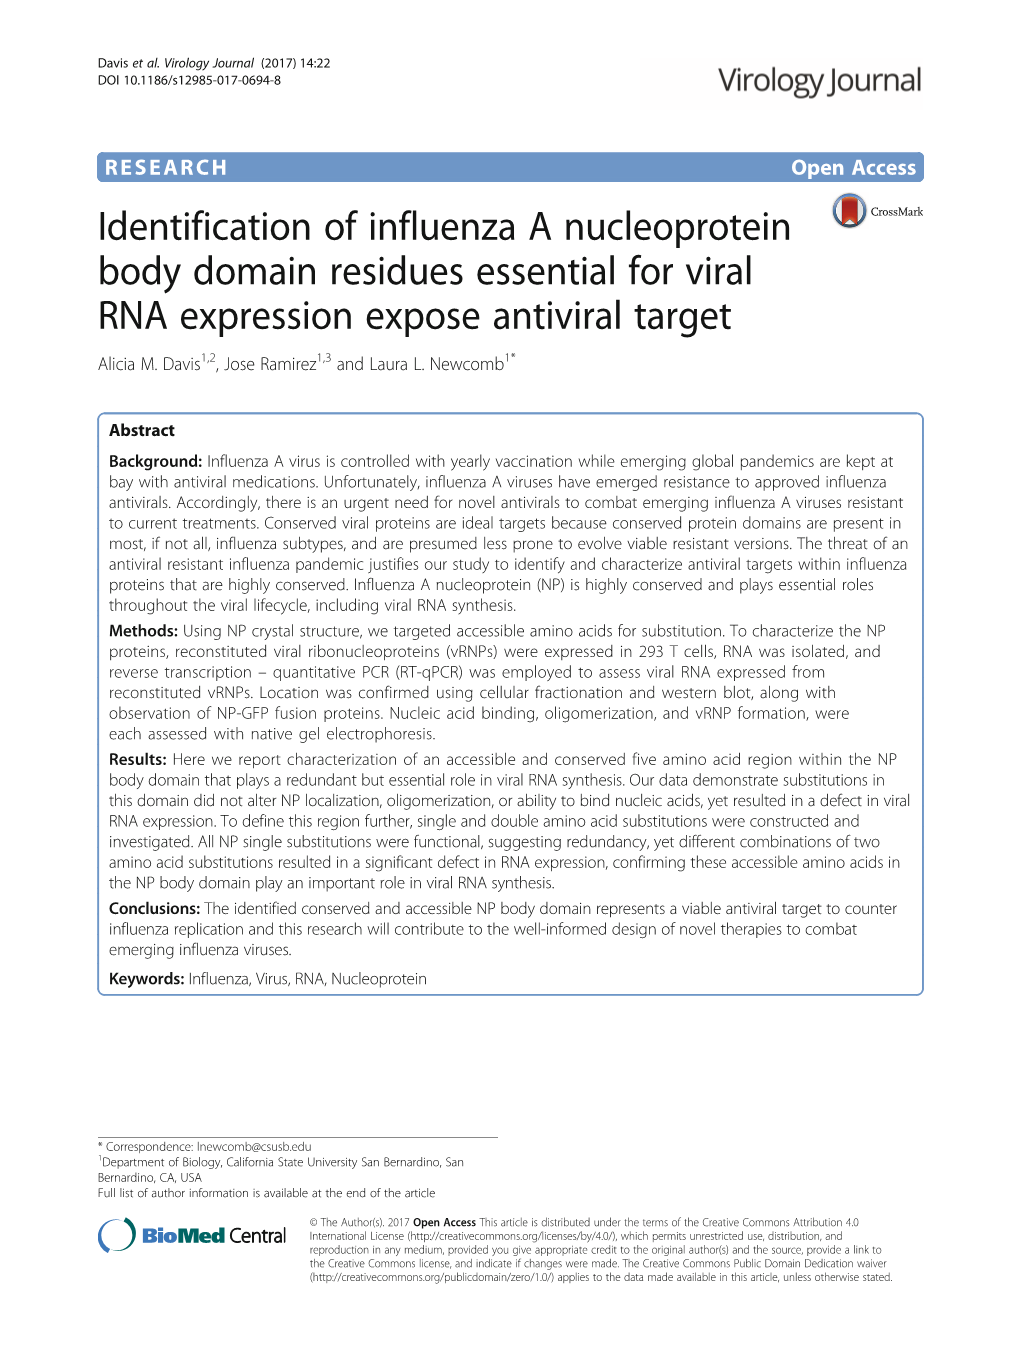 Identification of Influenza a Nucleoprotein Body Domain Residues Essential for Viral RNA Expression Expose Antiviral Target Alicia M